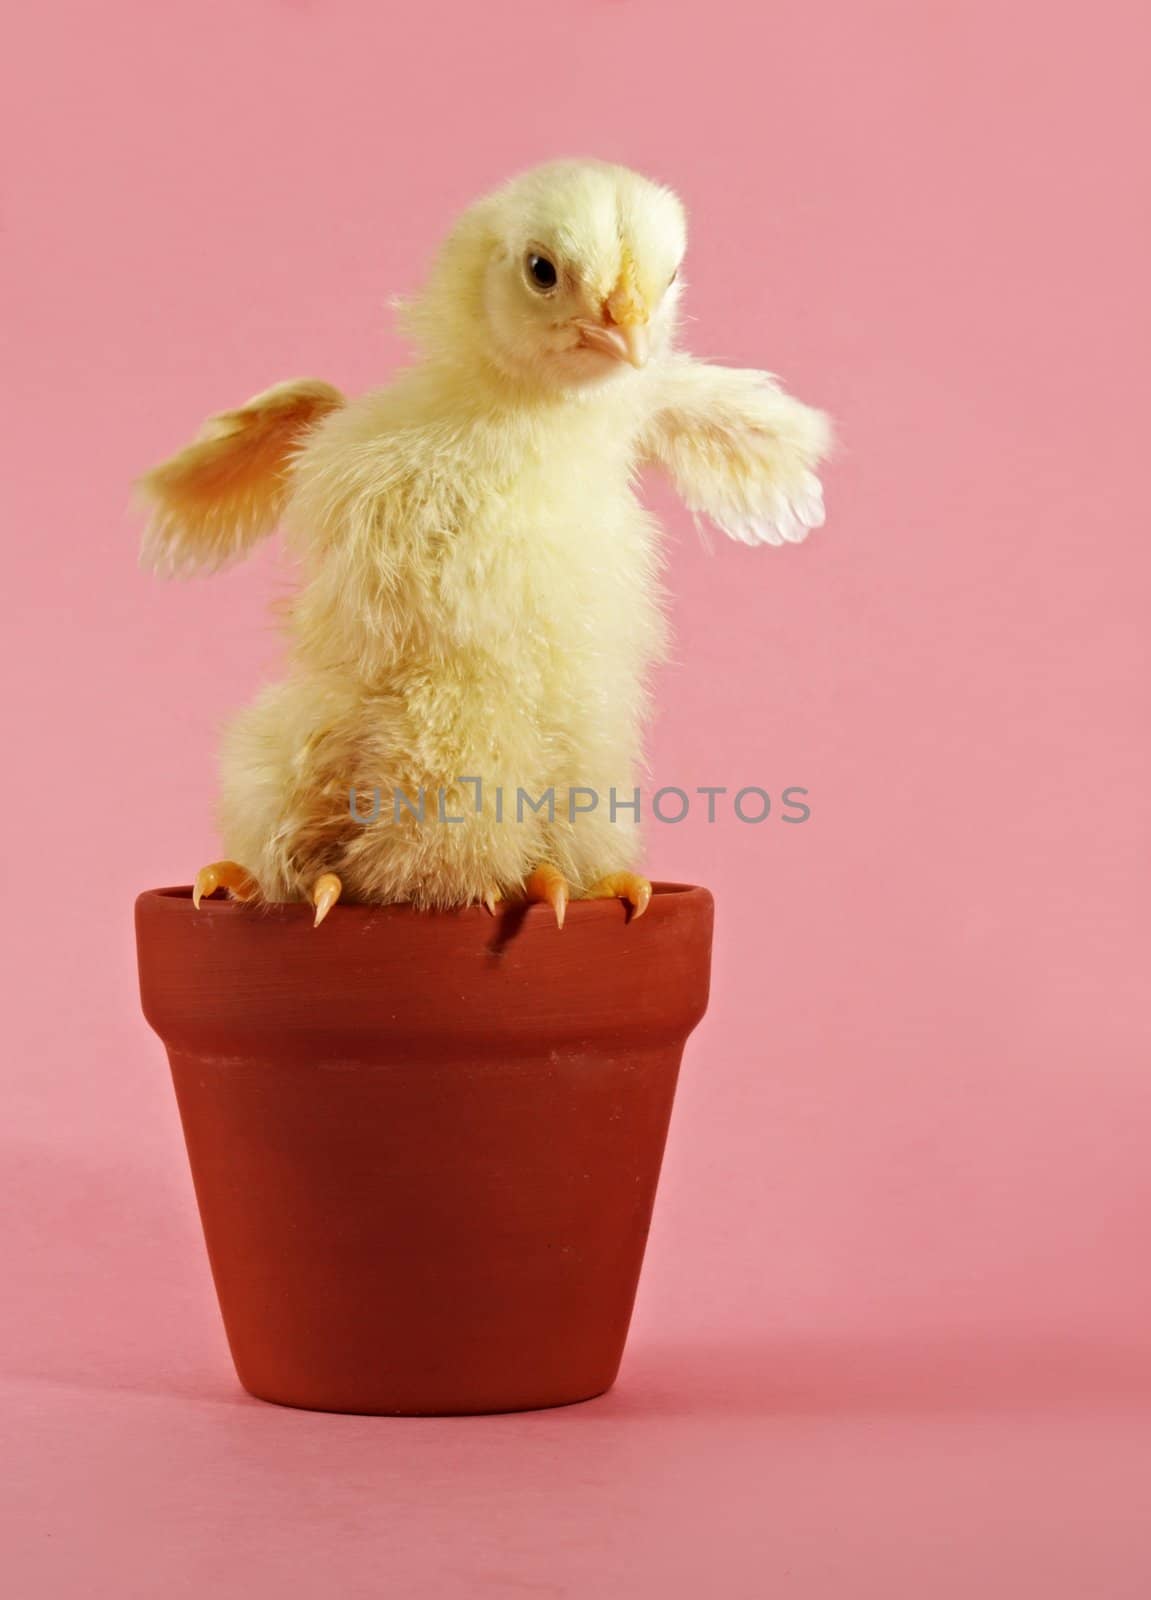 little yellow chick and flowerpot with pink background